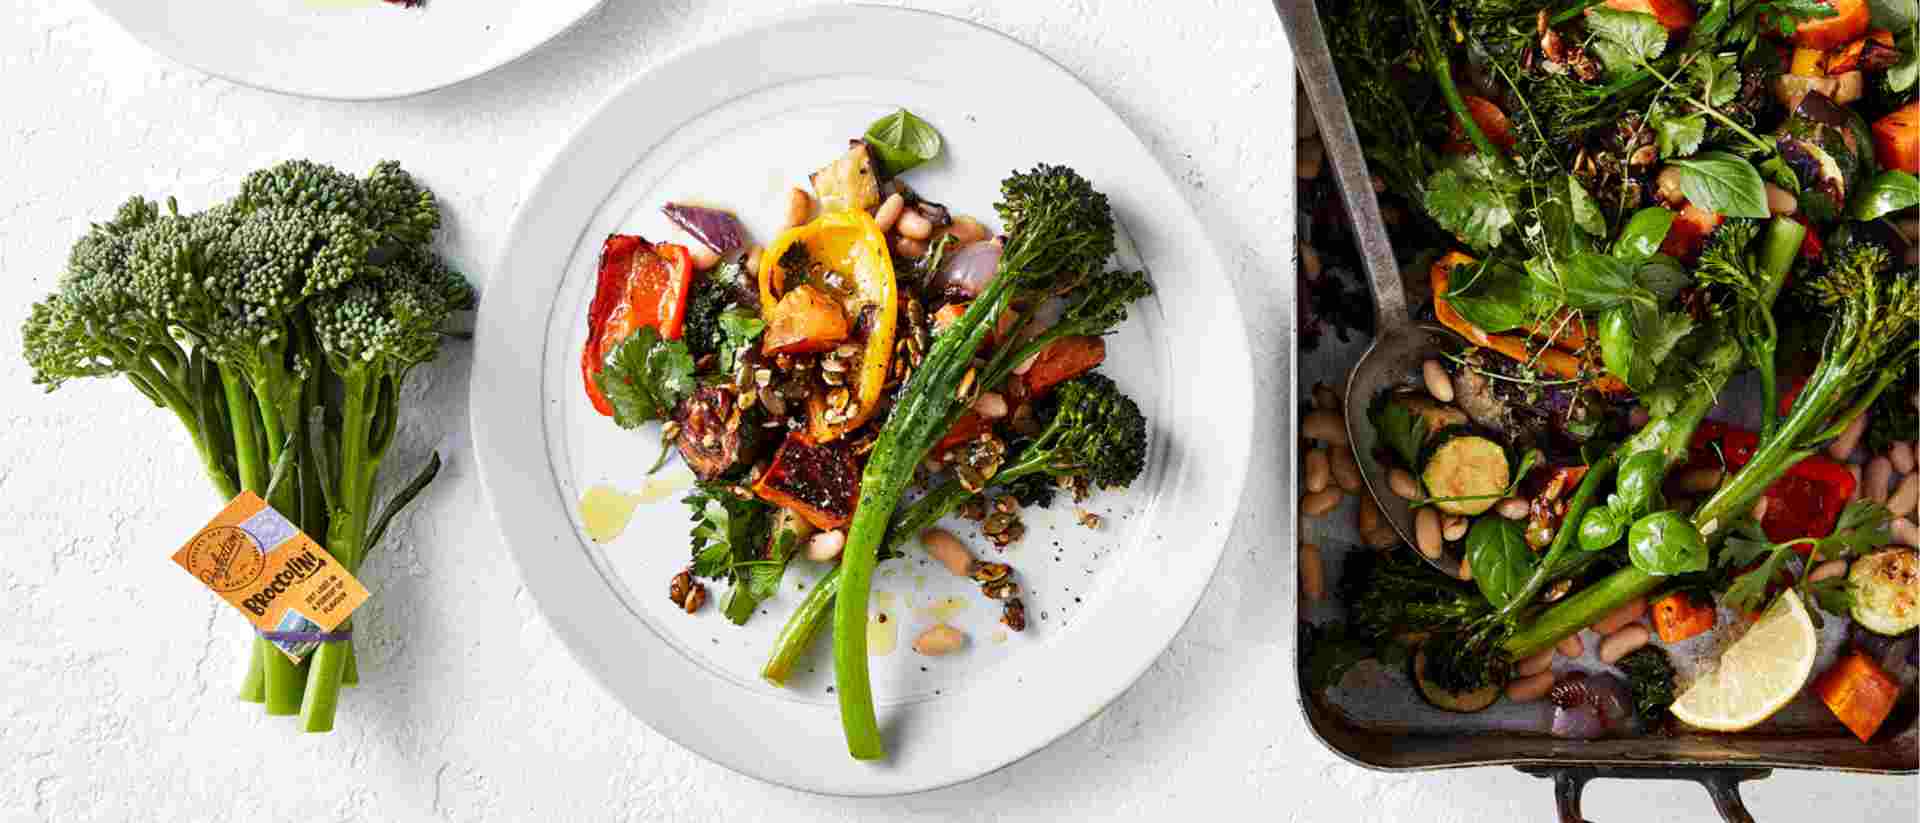 Oven Baked Broccolini And White Bean Salad Tray Bake Recipe